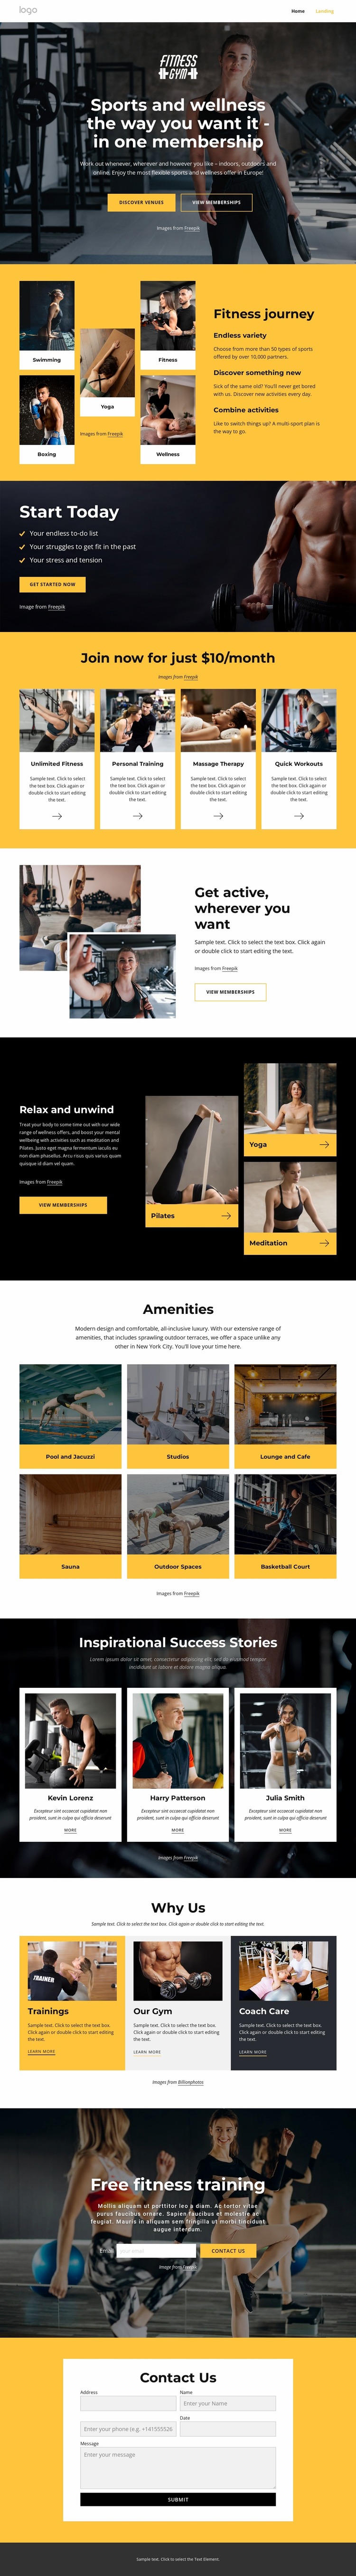 Gym, swimming, fitness classes Website Mockup